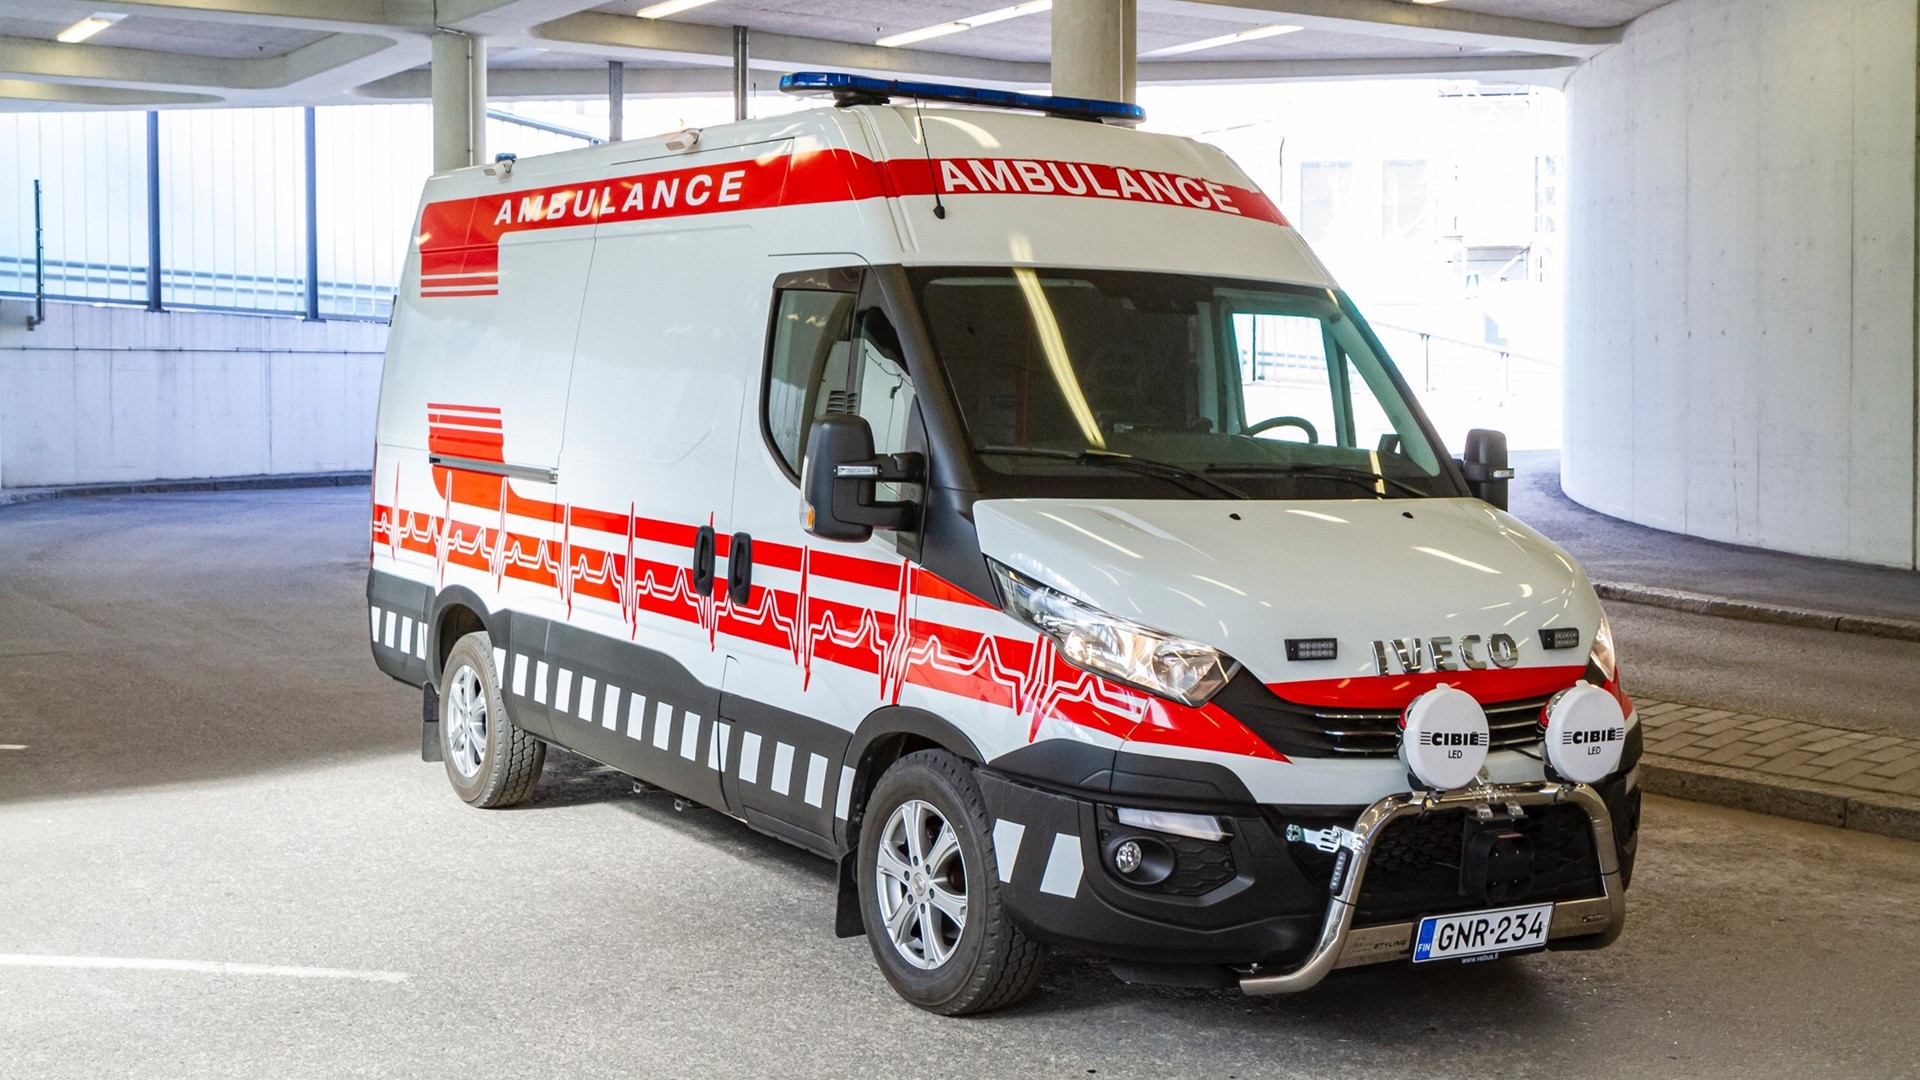 IVECO has donated to Helsinki University Hospital the use of a brand-new IVECO Daily ambulance for 3 months